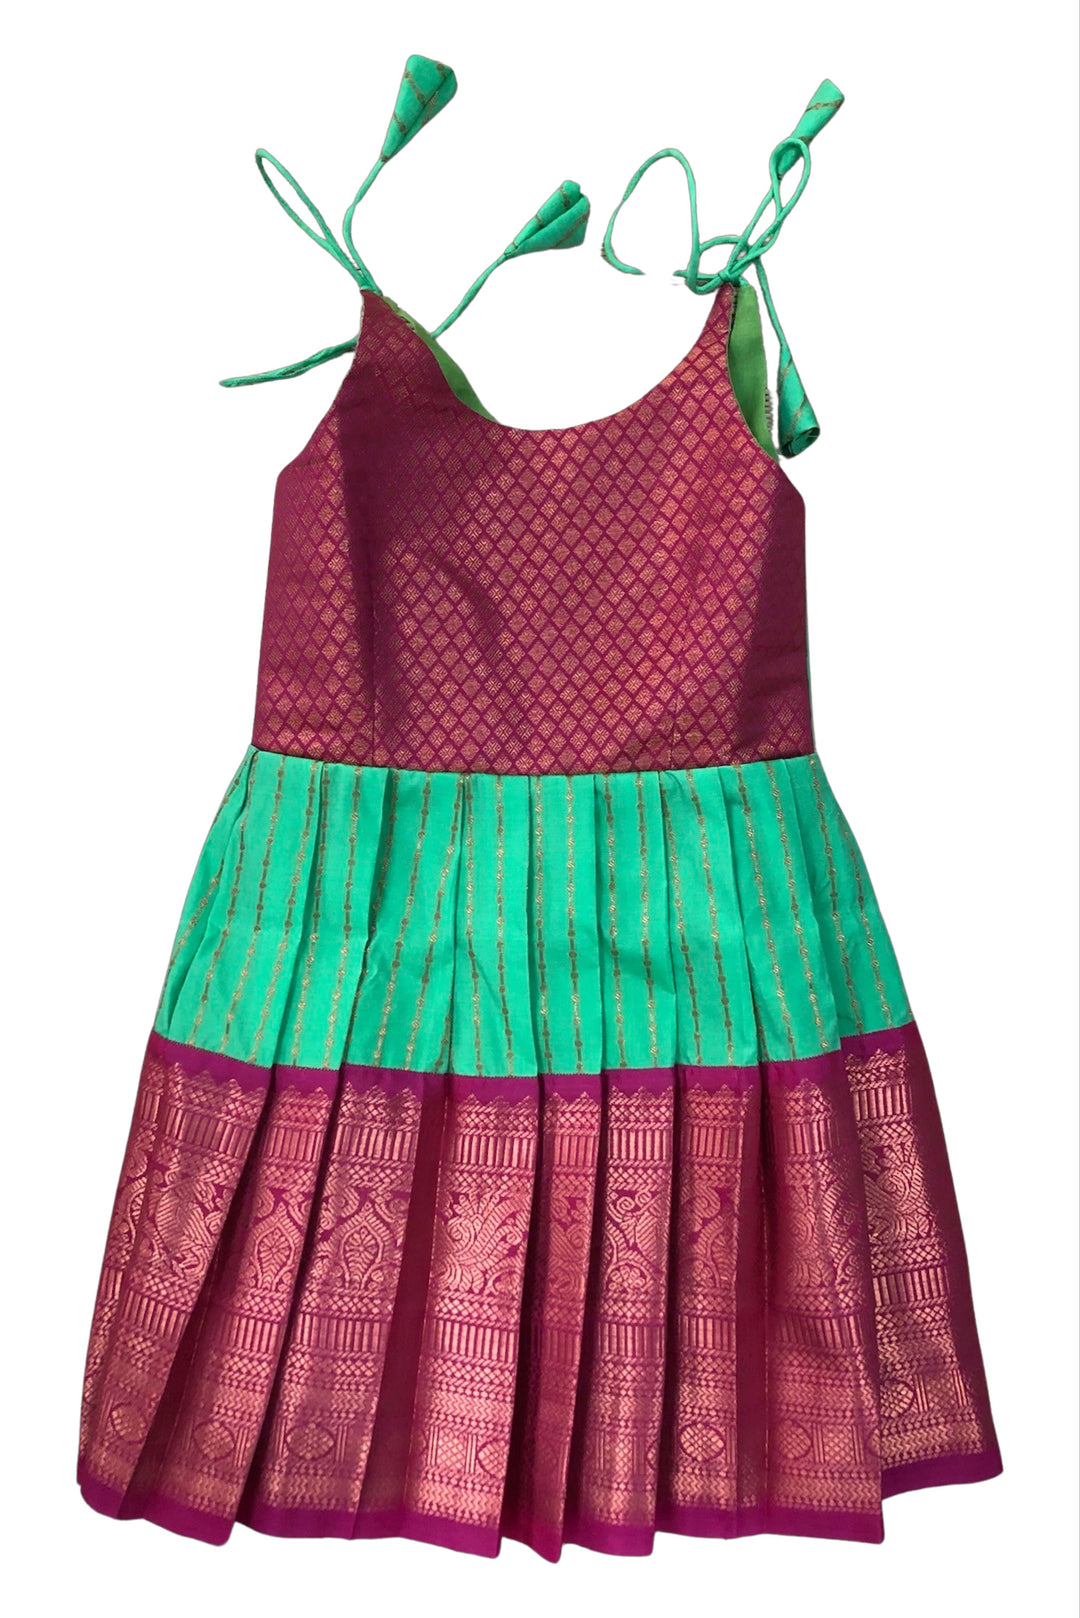 The Nesavu Tie-up Frock Magenta and Green Silk Tie-Up Frock - Traditional Party Dress Nesavu 18 (2Y) / Green / Style 1 T297A-18 Silk Party Dress in Magenta & Emerald | Ethnic Print Tie-Up Frock | The Nesavu